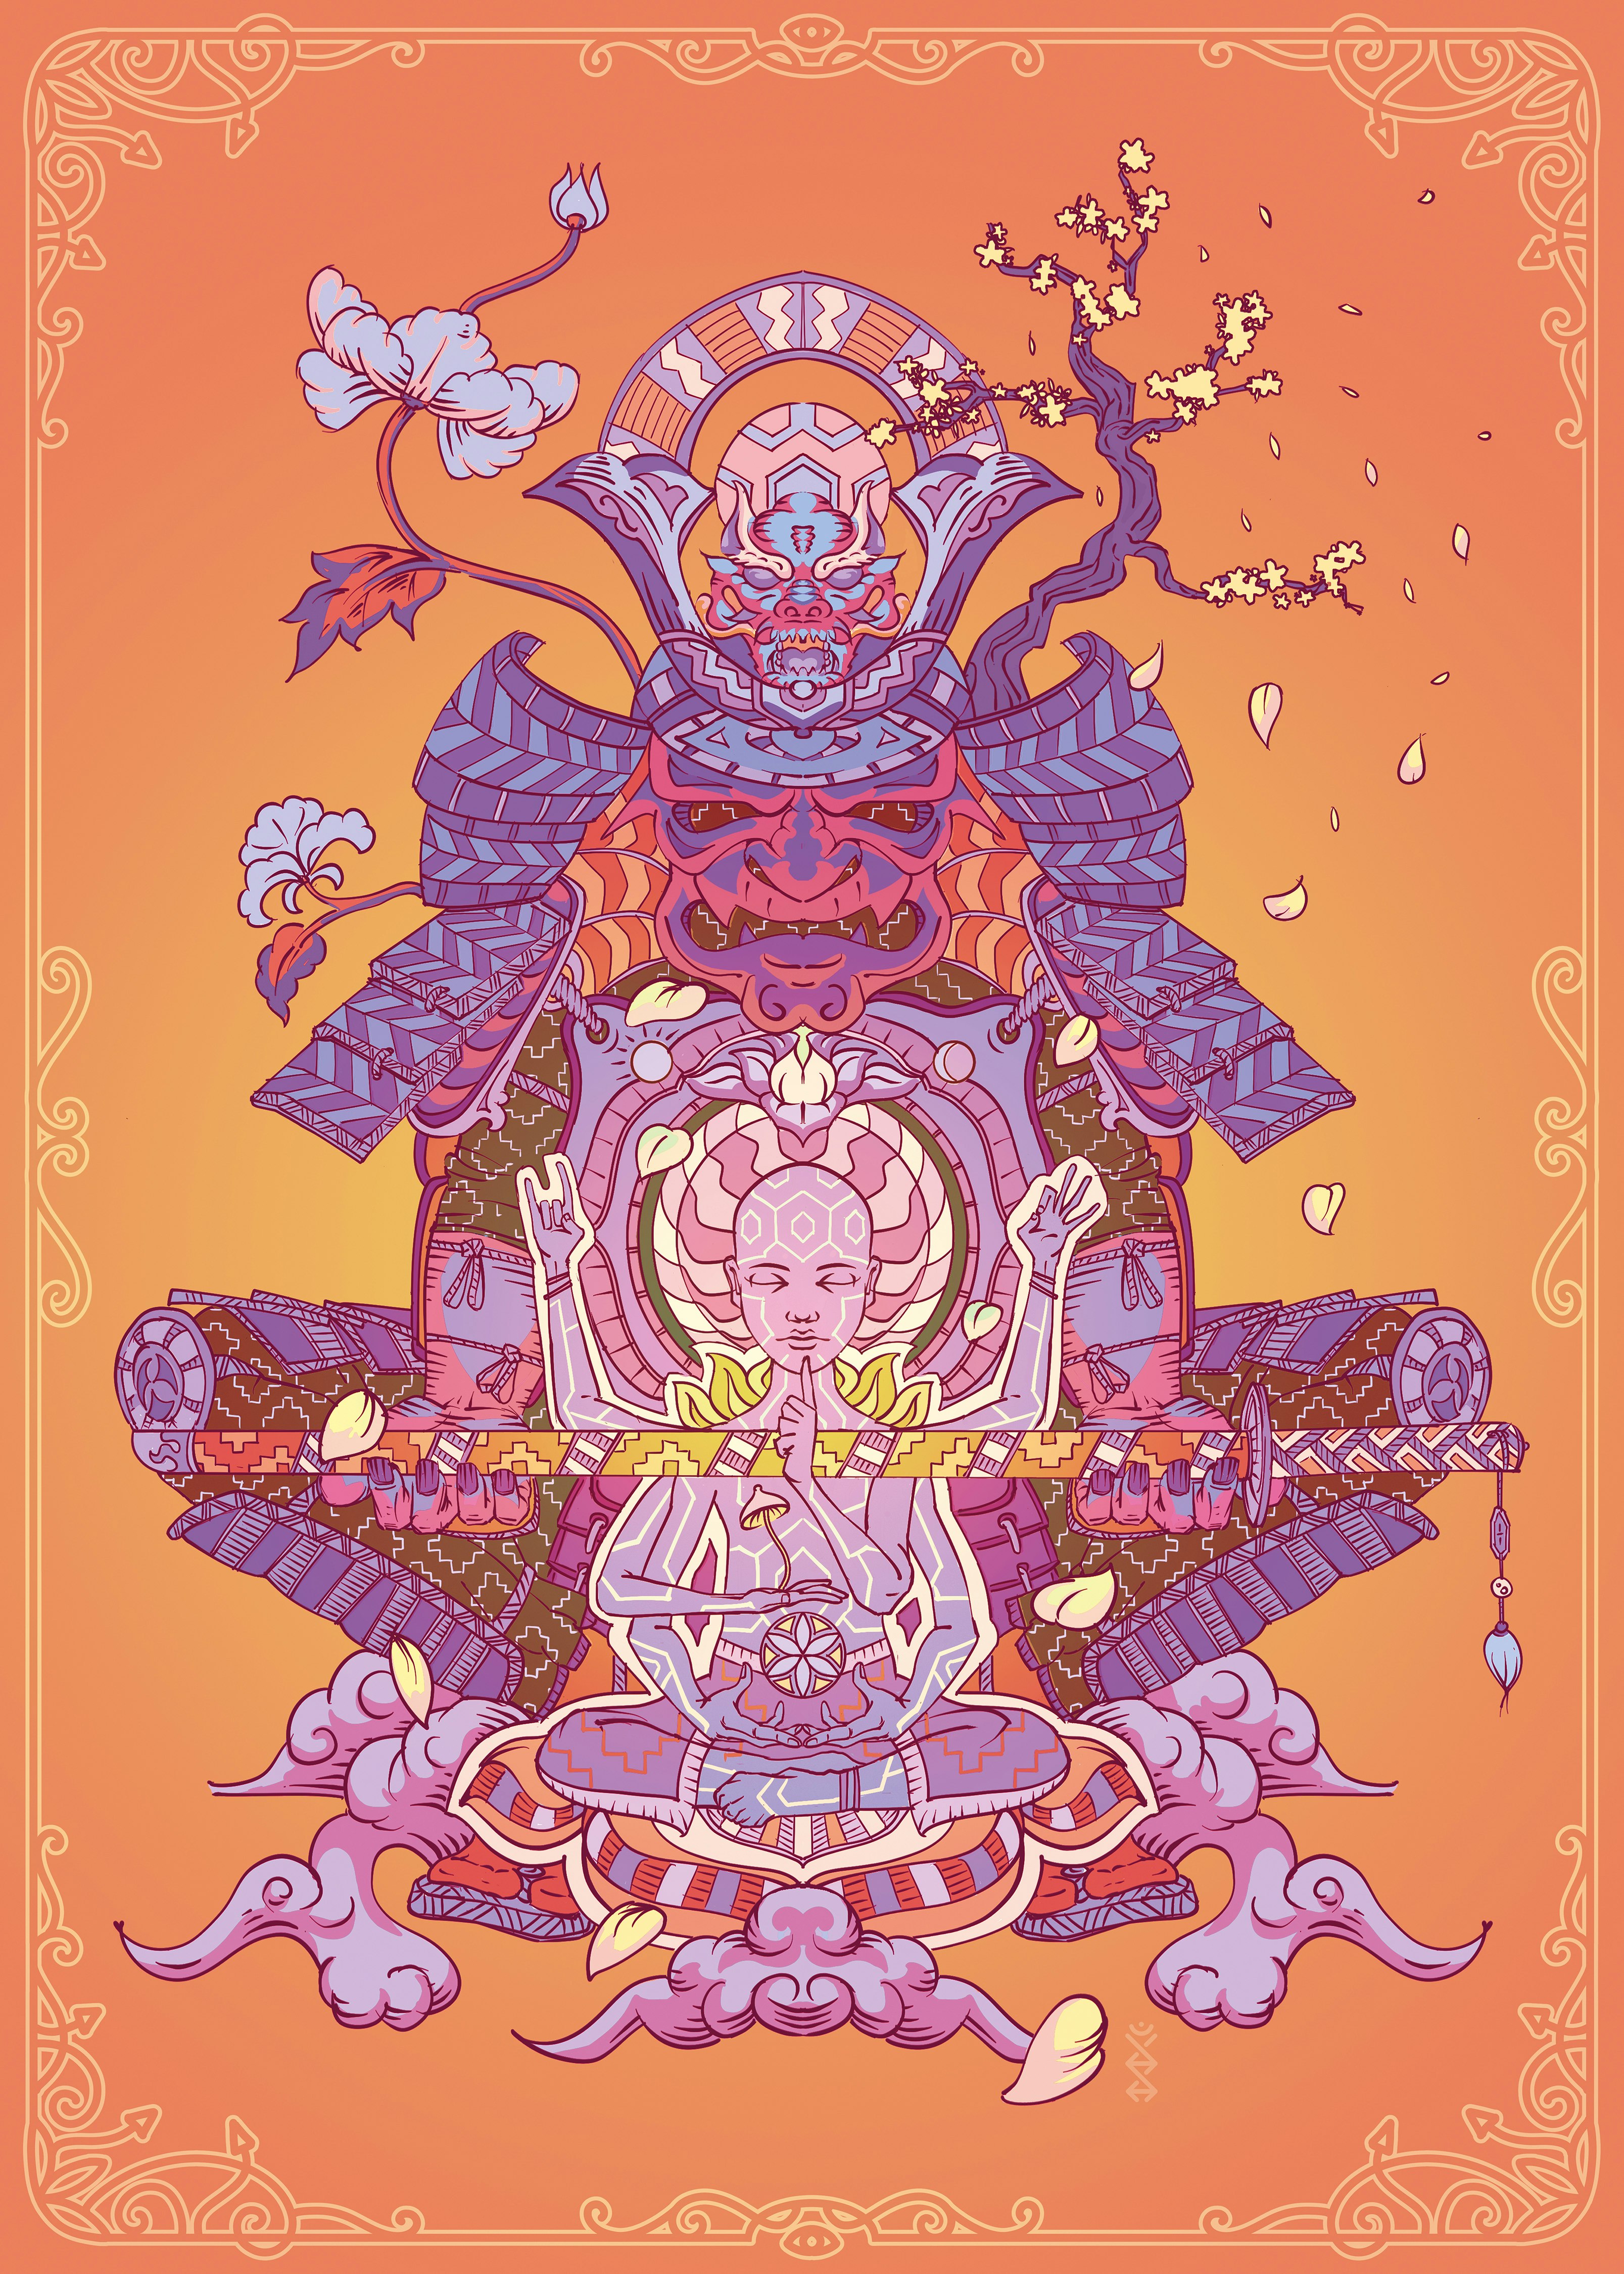 Ronin — Psychedelic Mystical Visionary Trippy Art